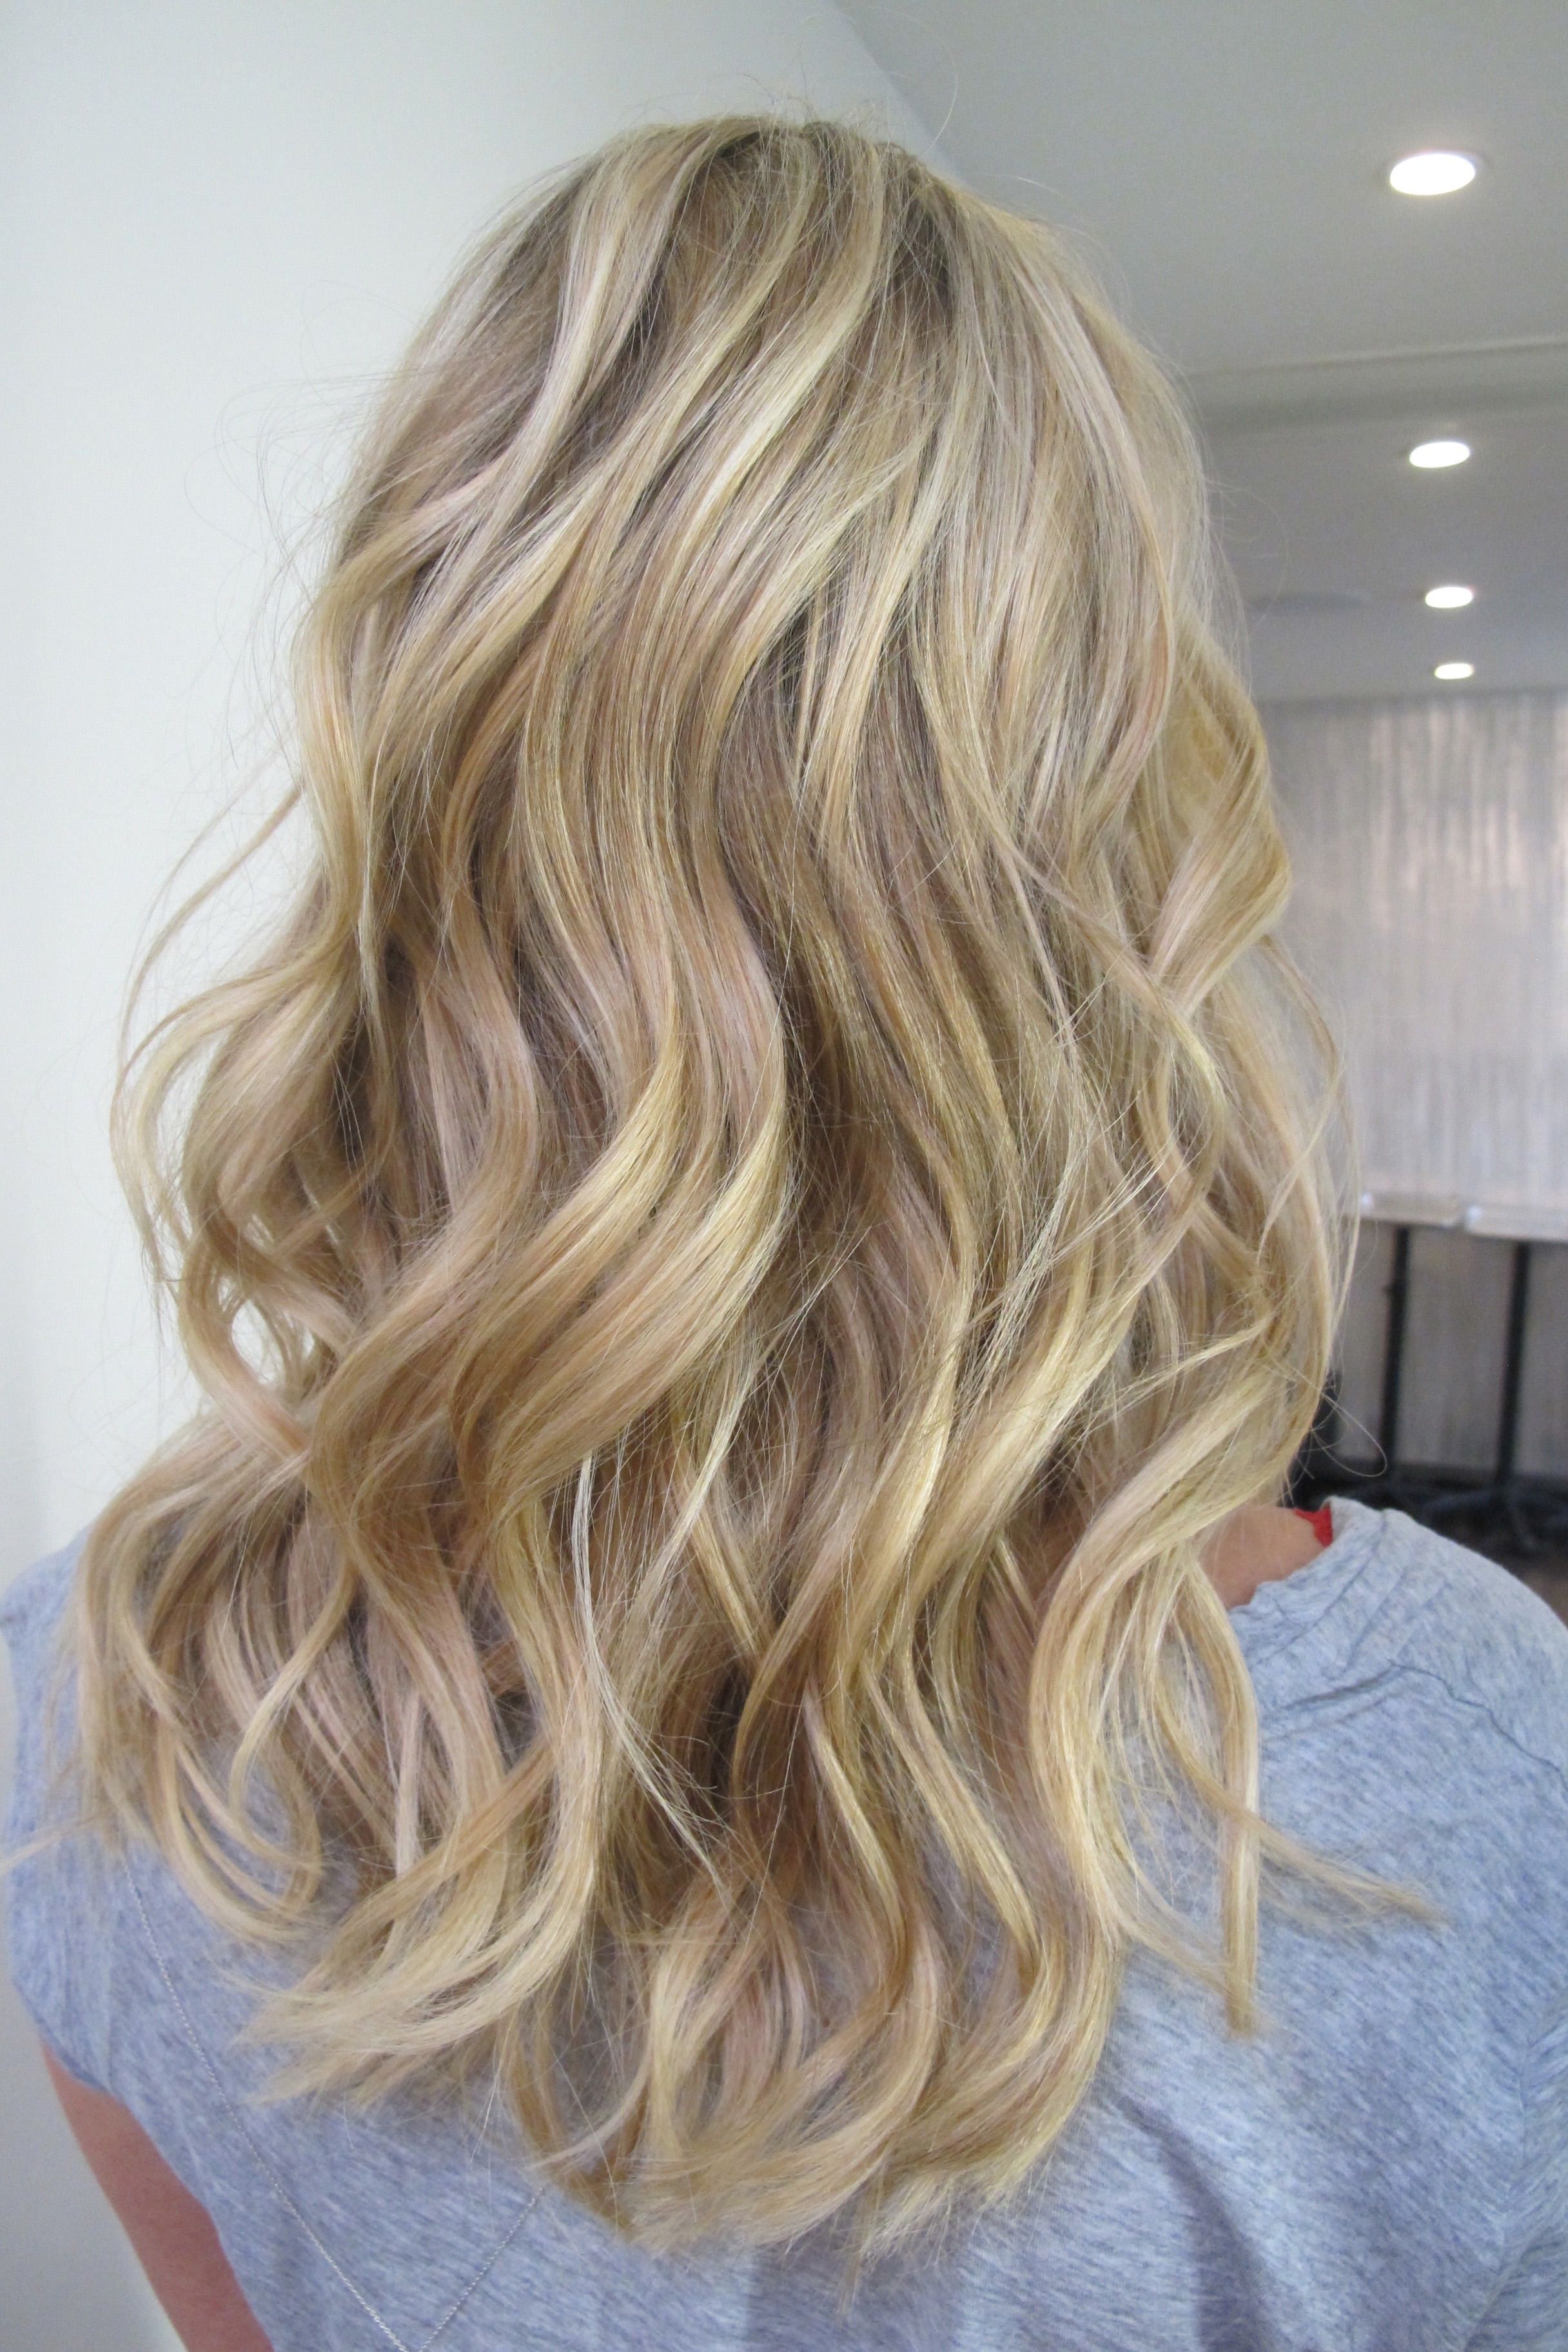 Widely Used Sandy Blonde Hairstyles Inside Sand Color Hair In Great Demand Sandy Blonde Hair With Blonde (View 4 of 20)